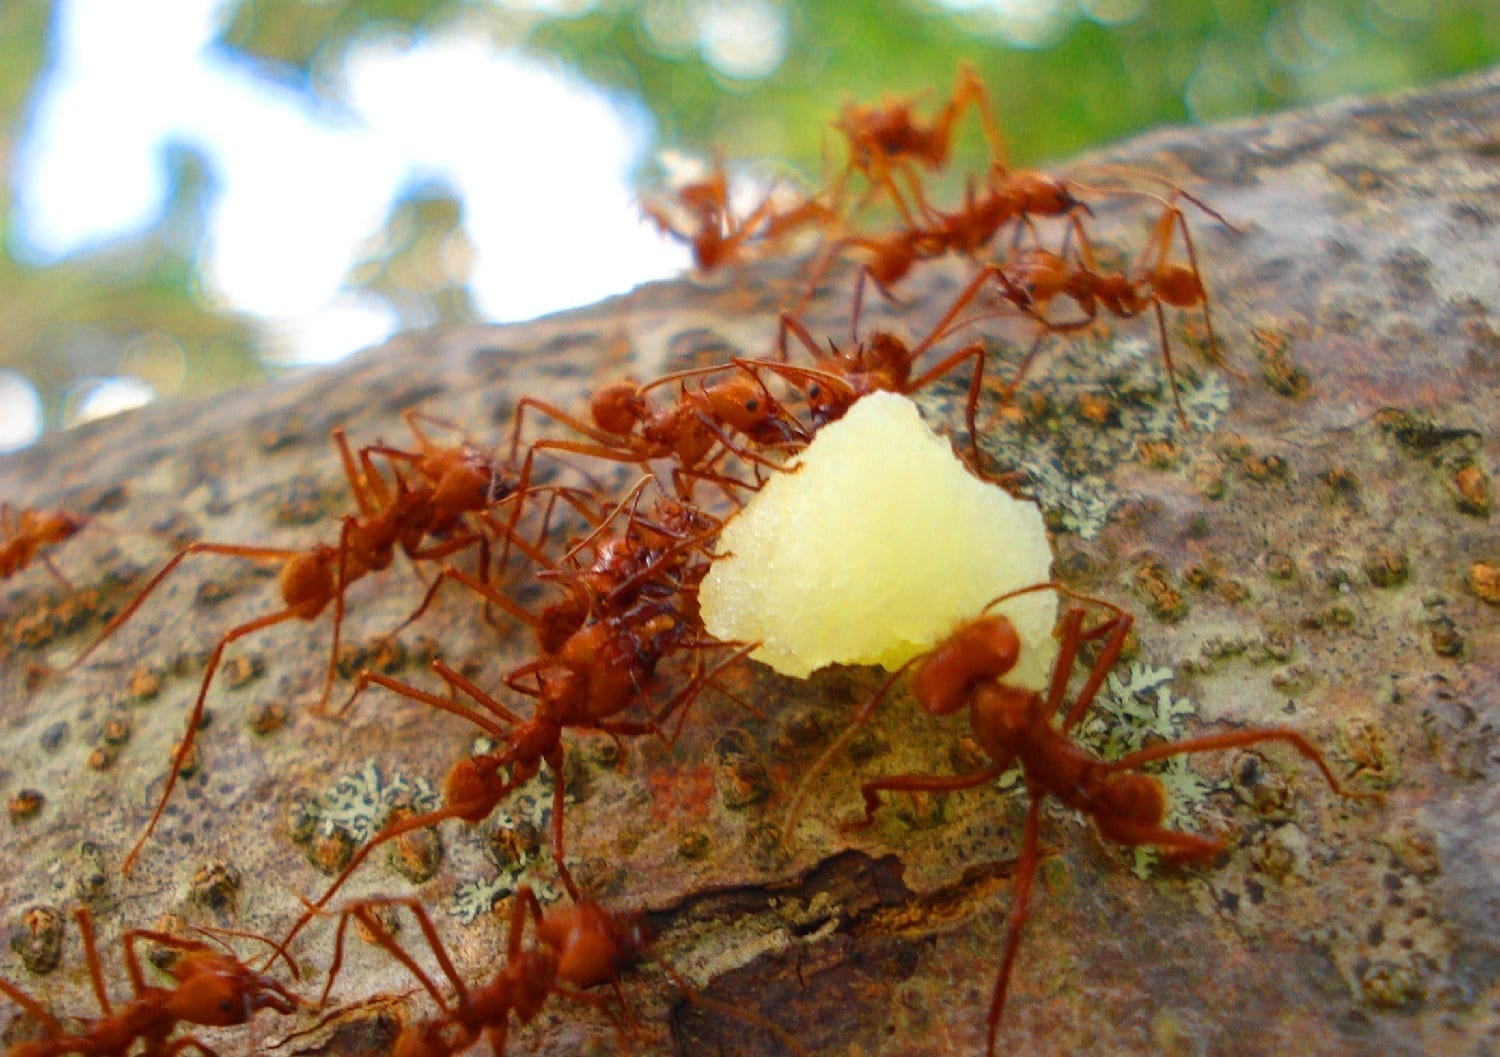 Red ants carrying food along a branch, photo credit: Ester Sánchez Alfaro